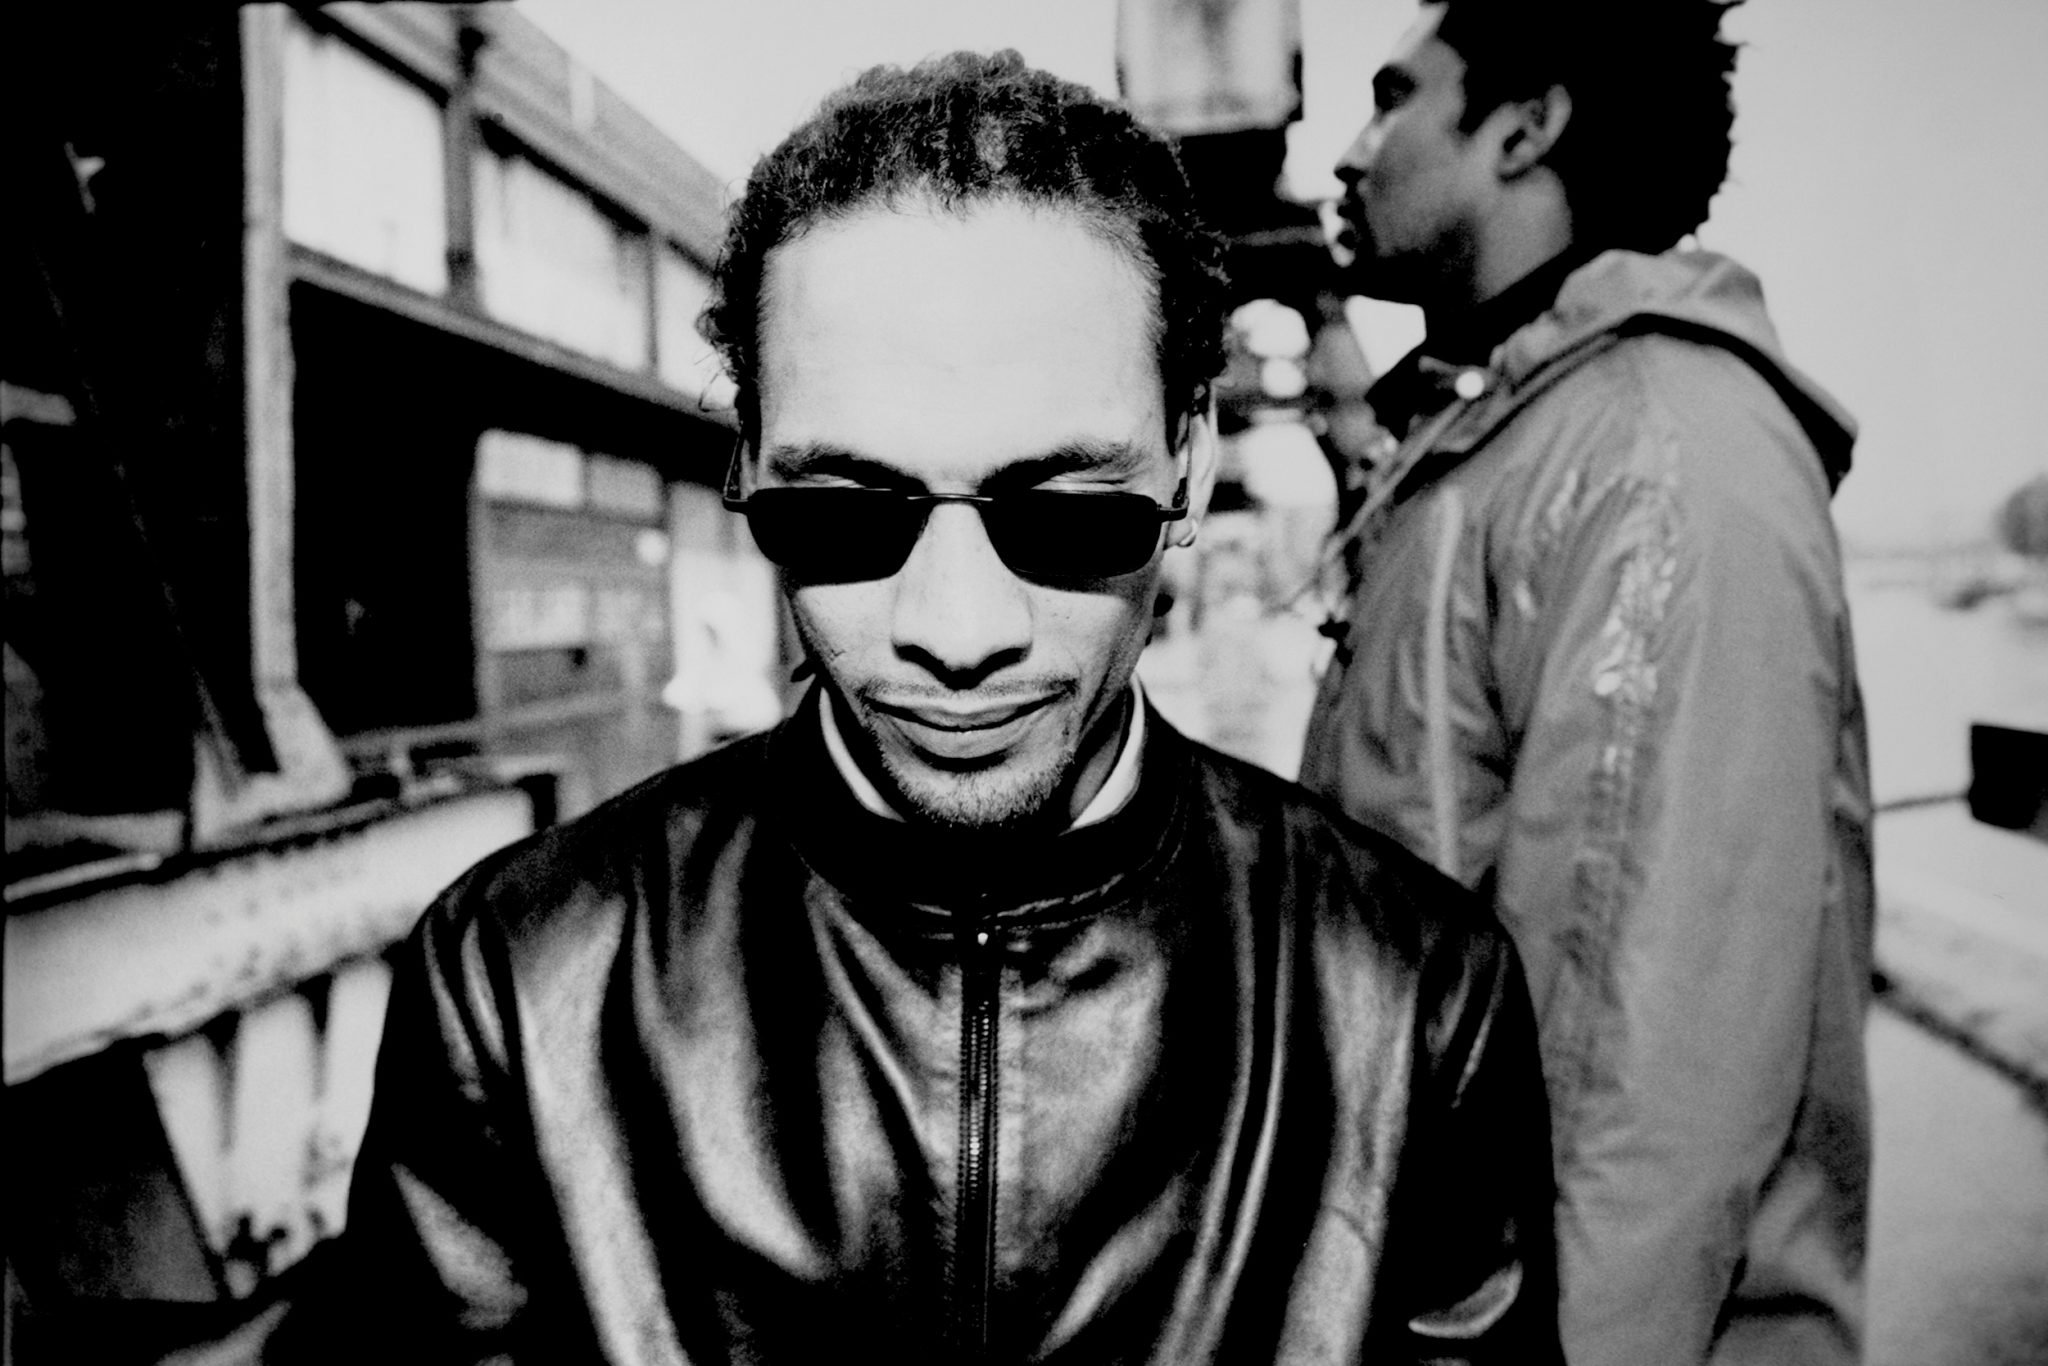 Roni Size Top 5 Albums Of All Time - Classic Album Sundays